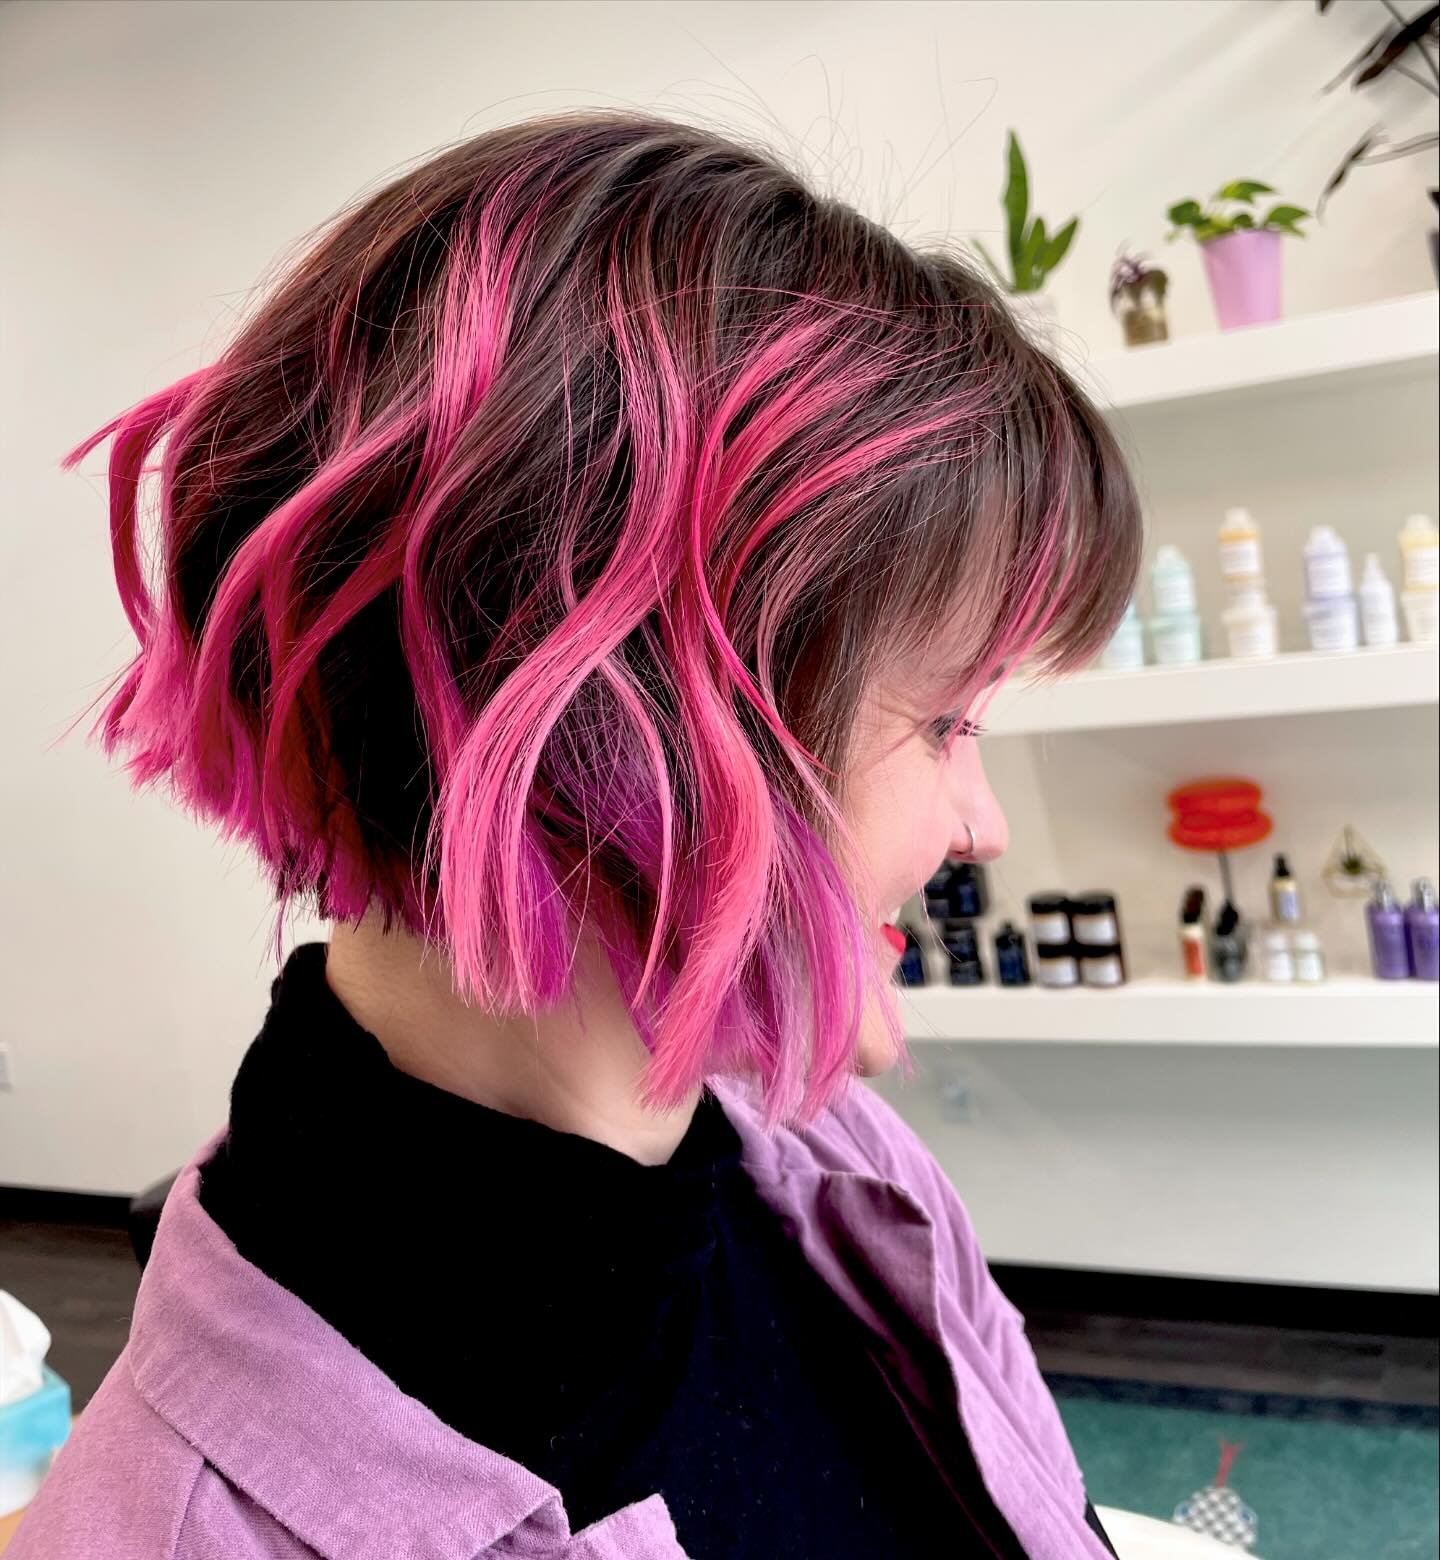 We 💖 Shannon at PRISM South and we 💘 this pink vibey hair she created! Done 

🌸🌺🌷🎀👙💄👛

All the emojis for this one!

Wanna book with Shannon? Save this post and text 804-319-7825 to book with her today!